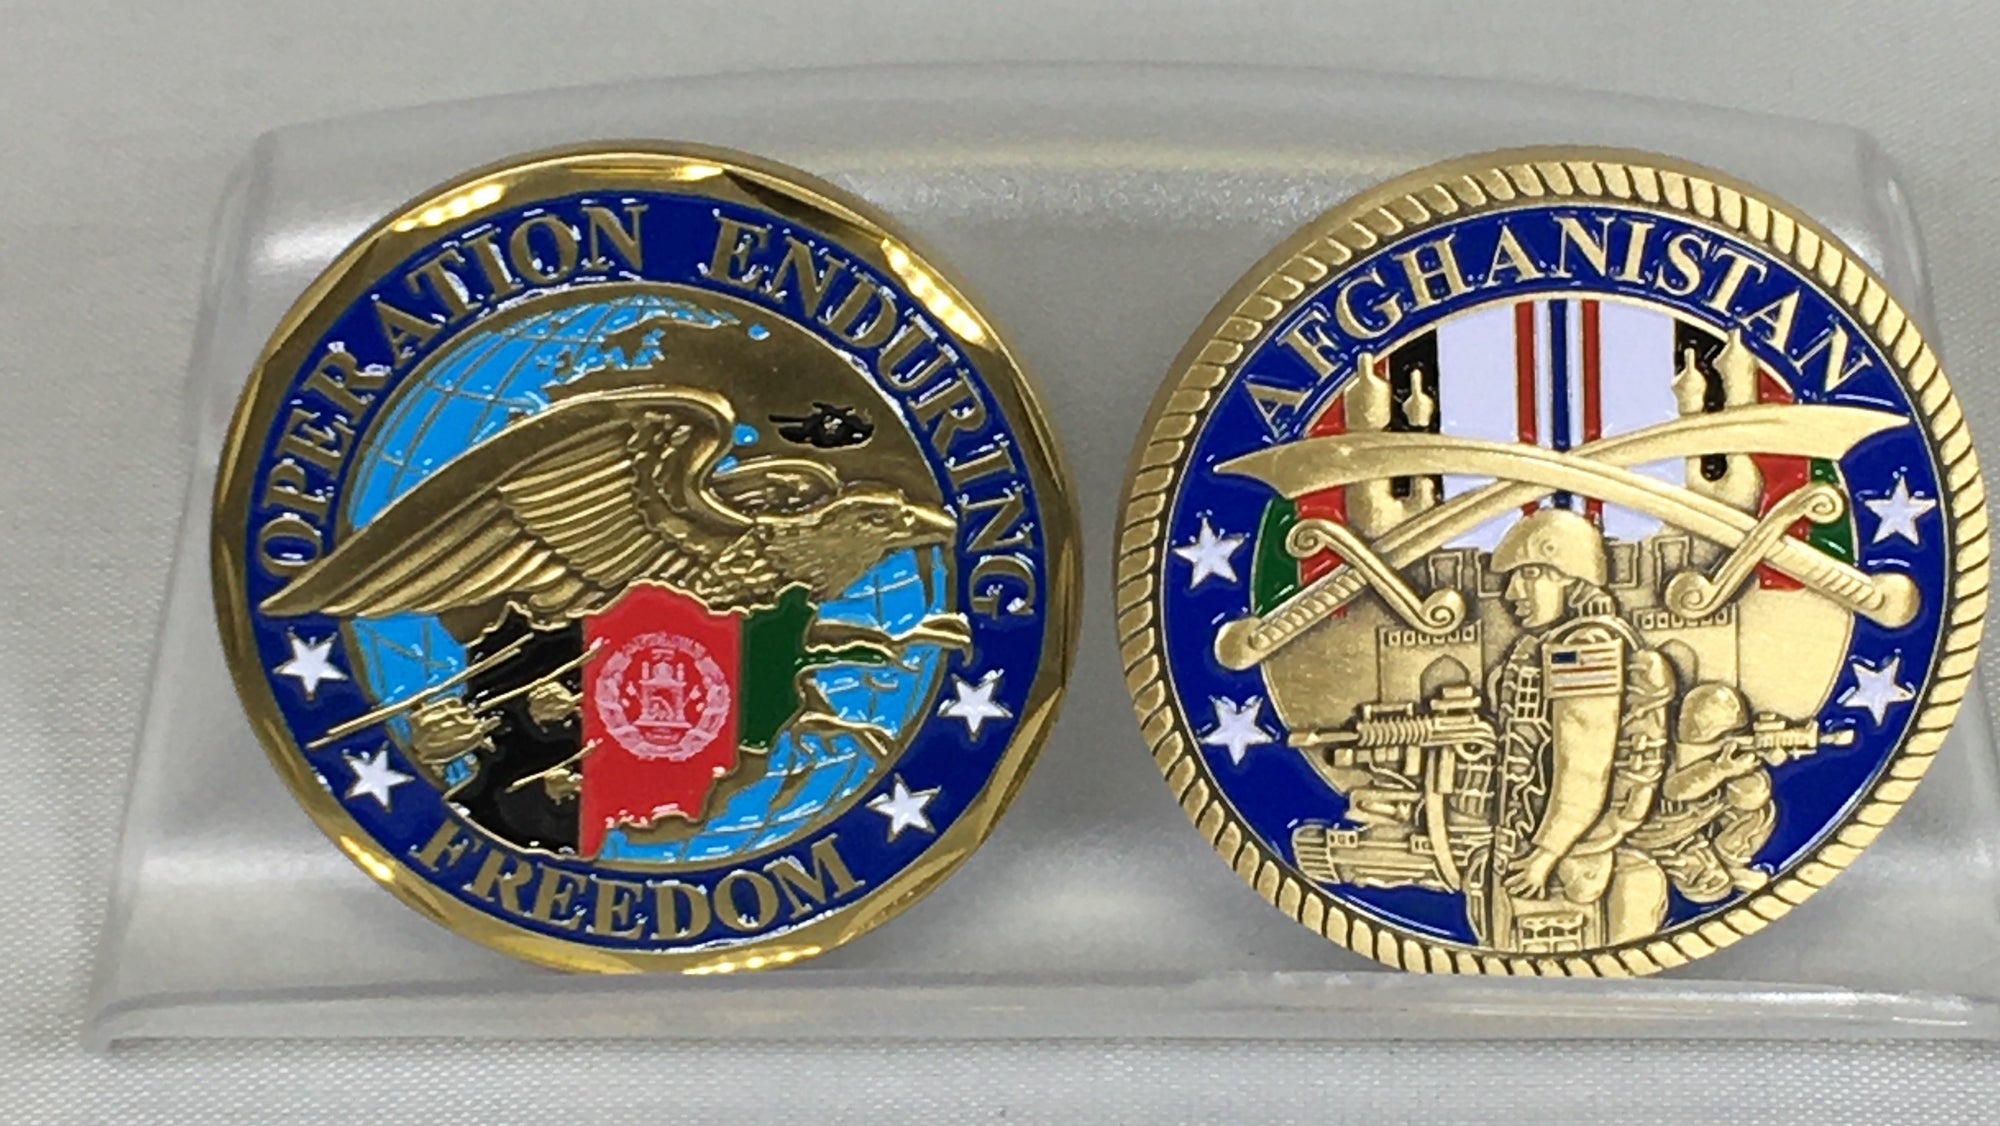 Operation Enduring Freedom Challenge Coin - Hi Army Museum Society